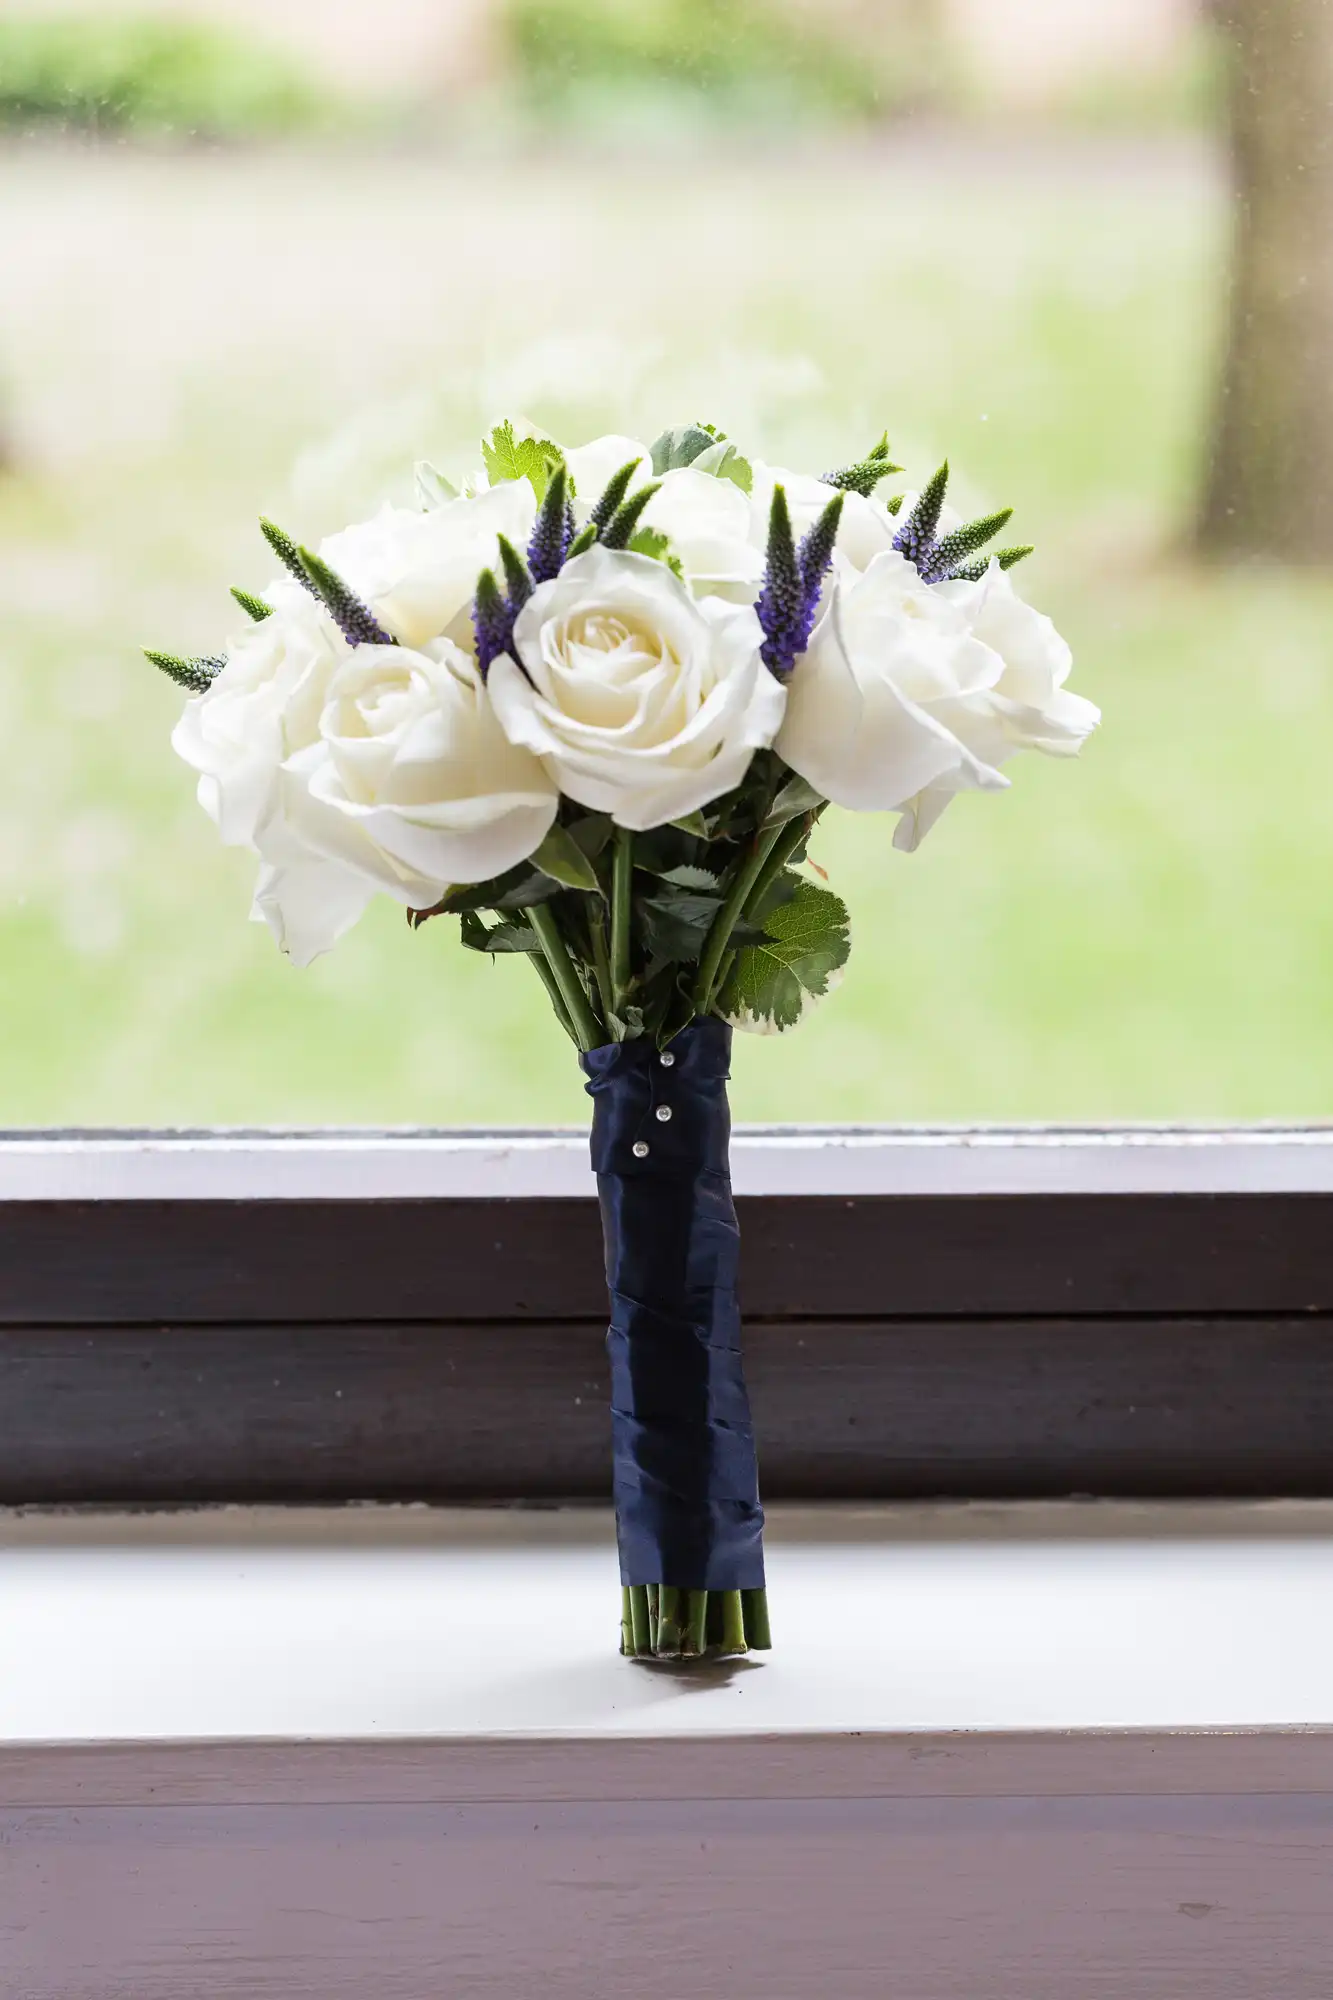 A bouquet of white roses and purple flowers tied with a navy ribbon, standing on a windowsill with a blurred green background.